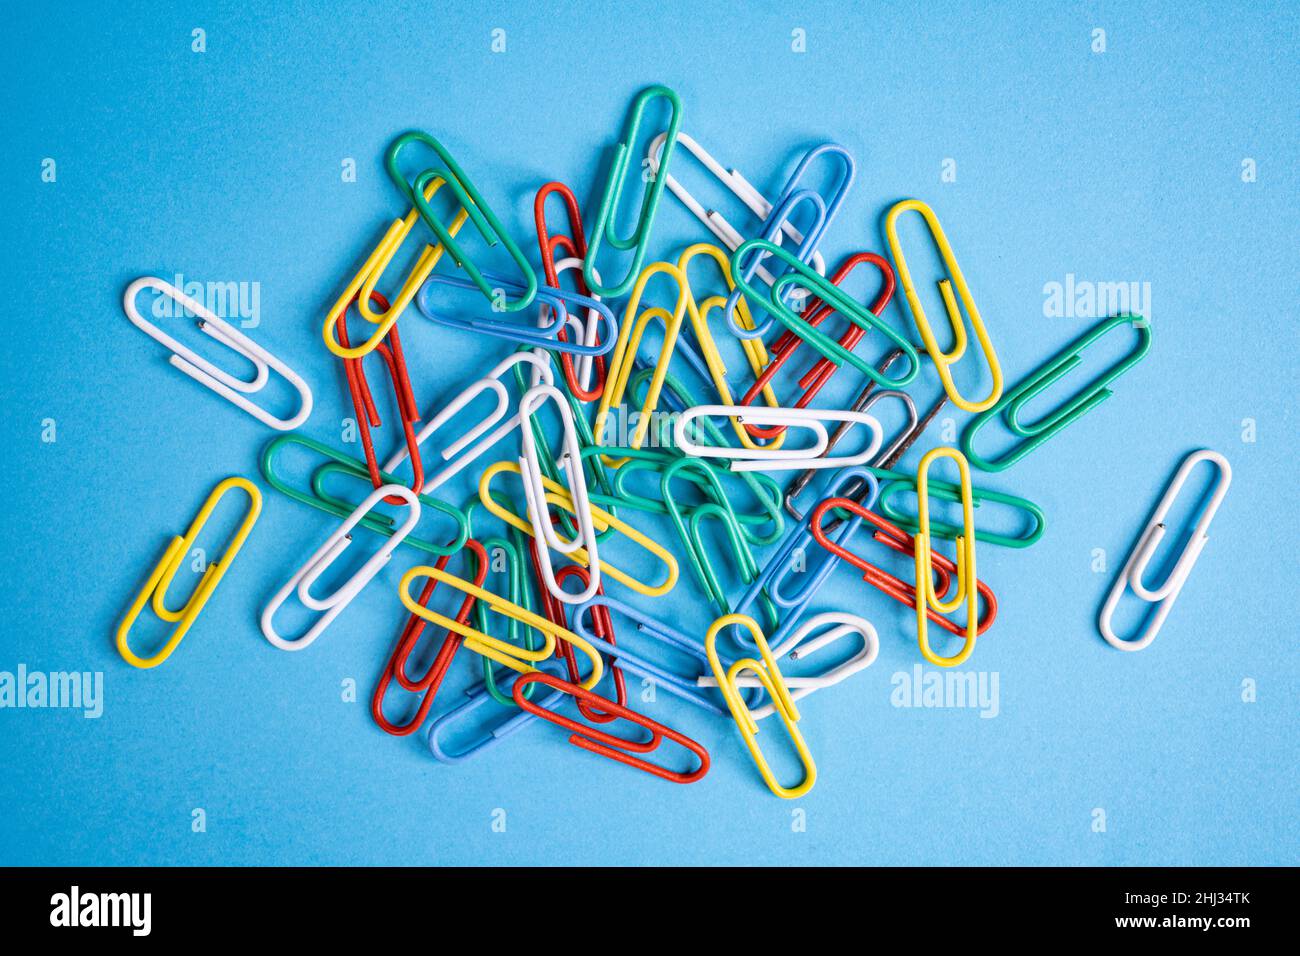 some colored paper clips on a blue surface Stock Photo